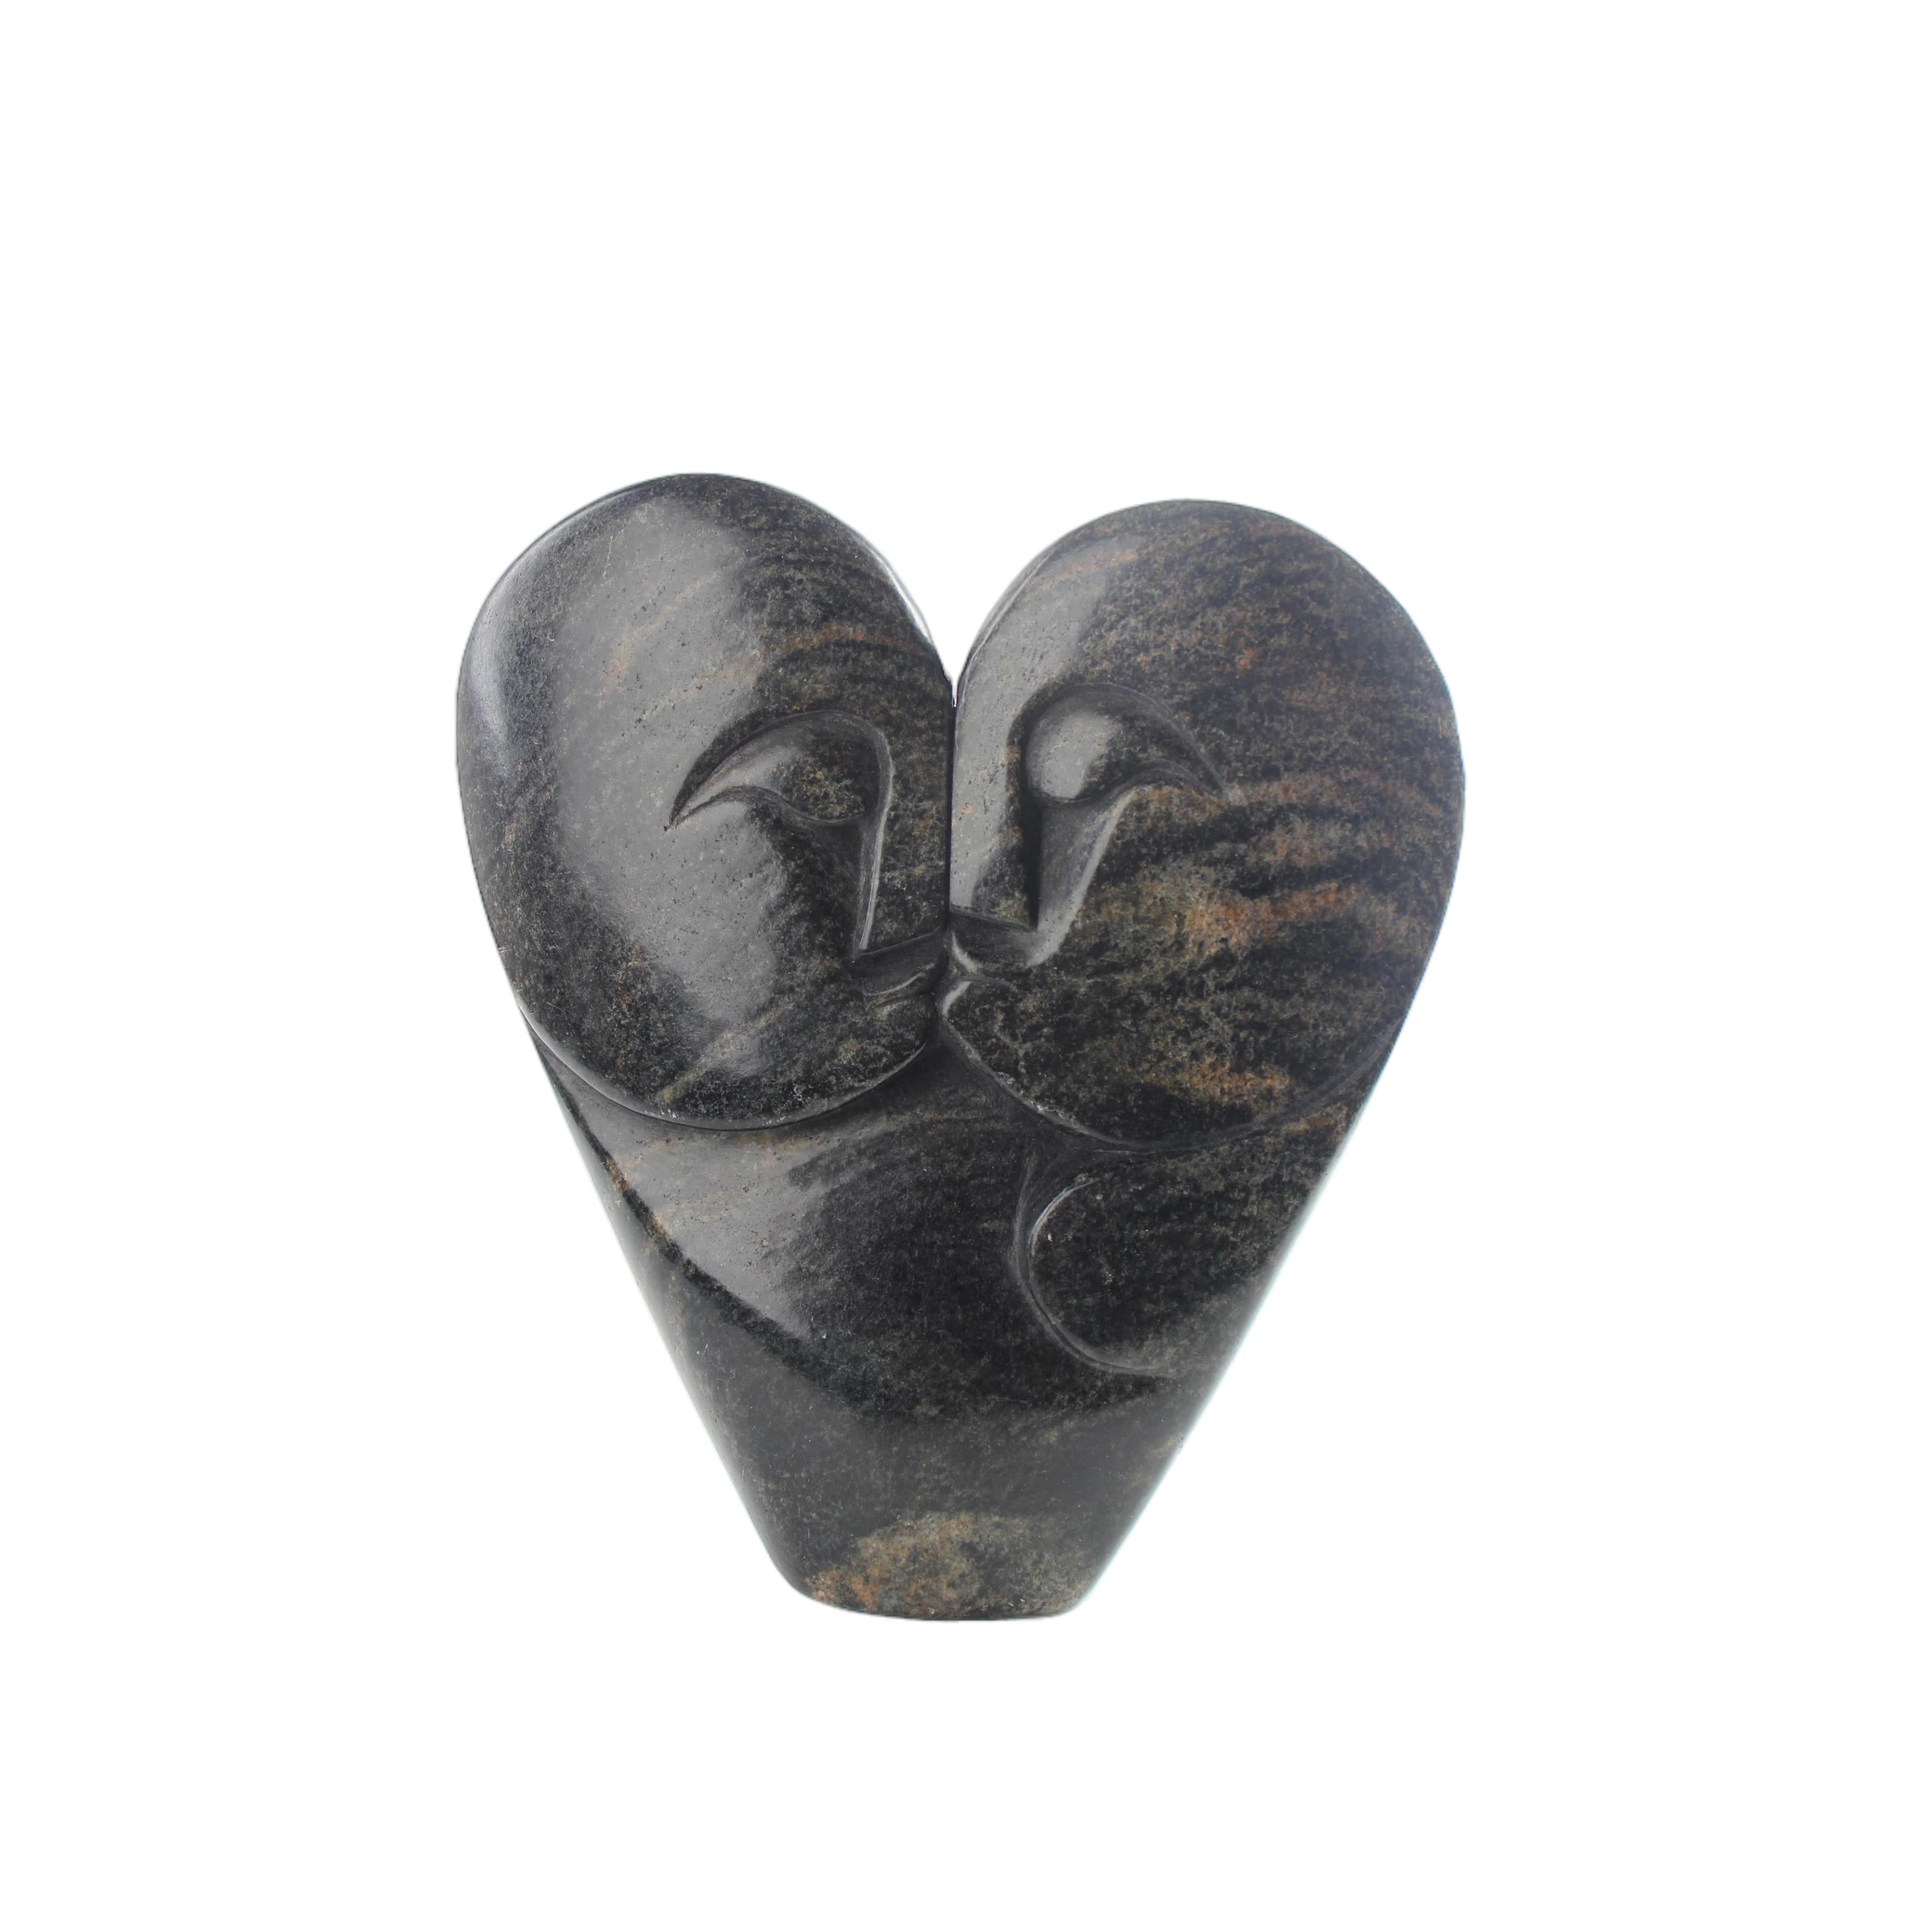 Shona Tribe Serpentine Stone Lovers ~8.7" Tall - Lovers